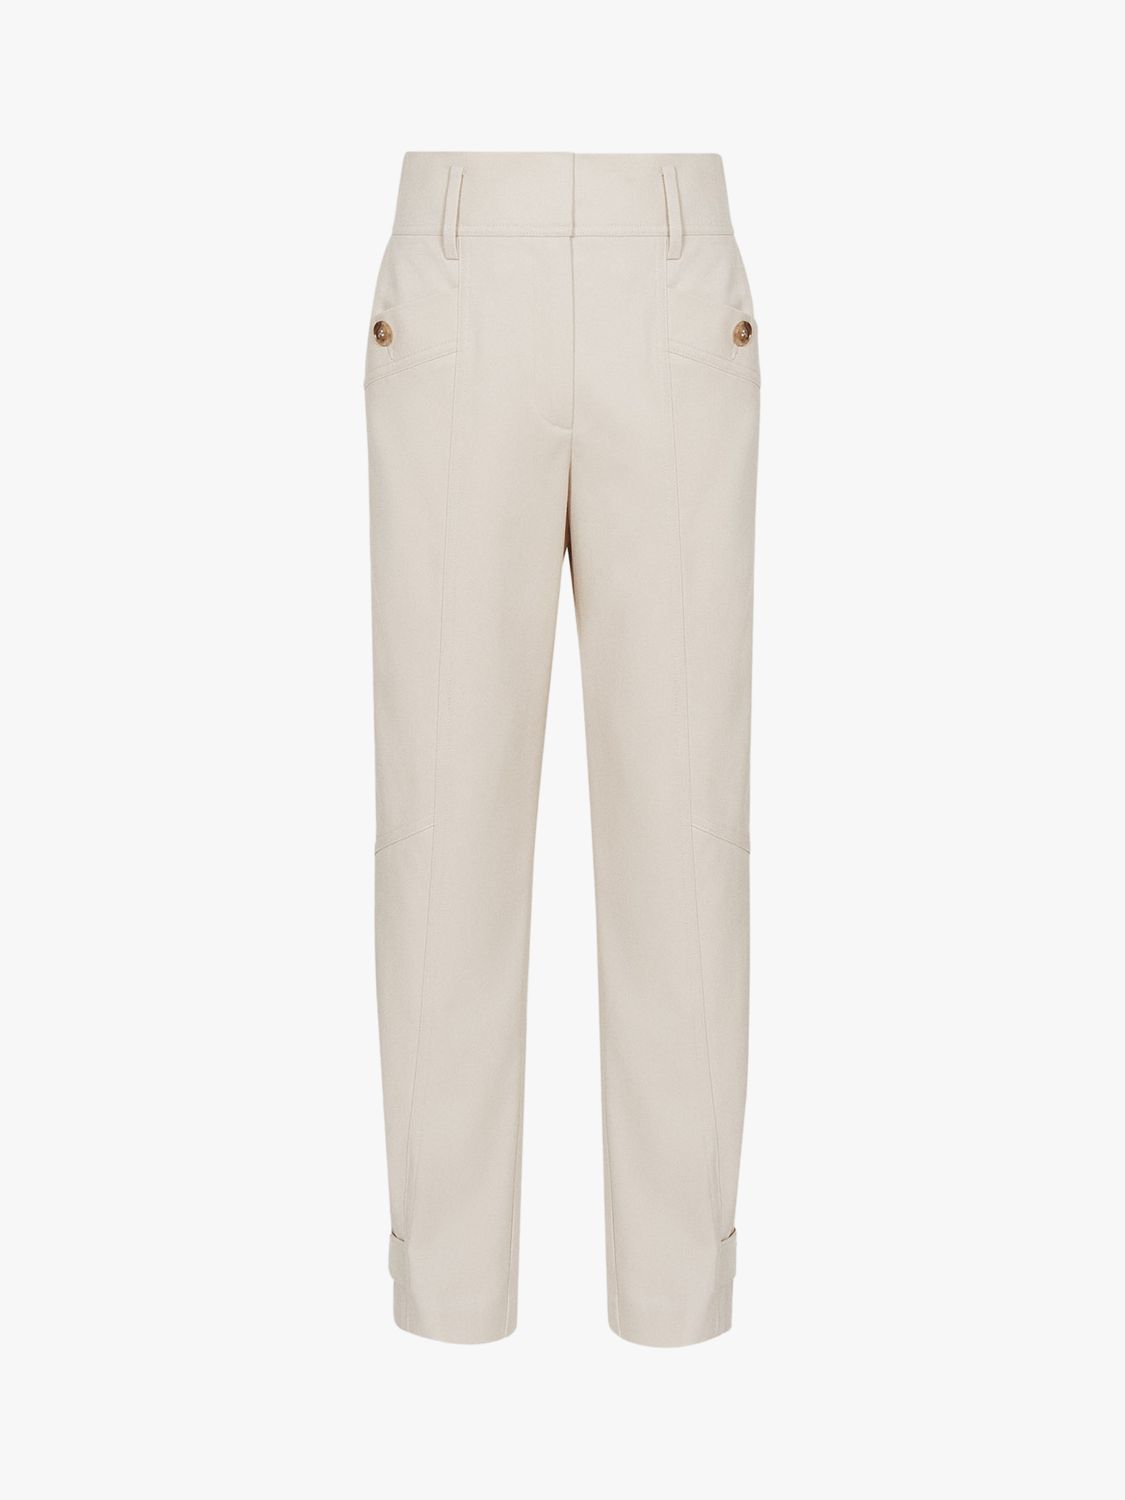 Reiss Madeline Front Pocket Tapered Trousers, Neutral